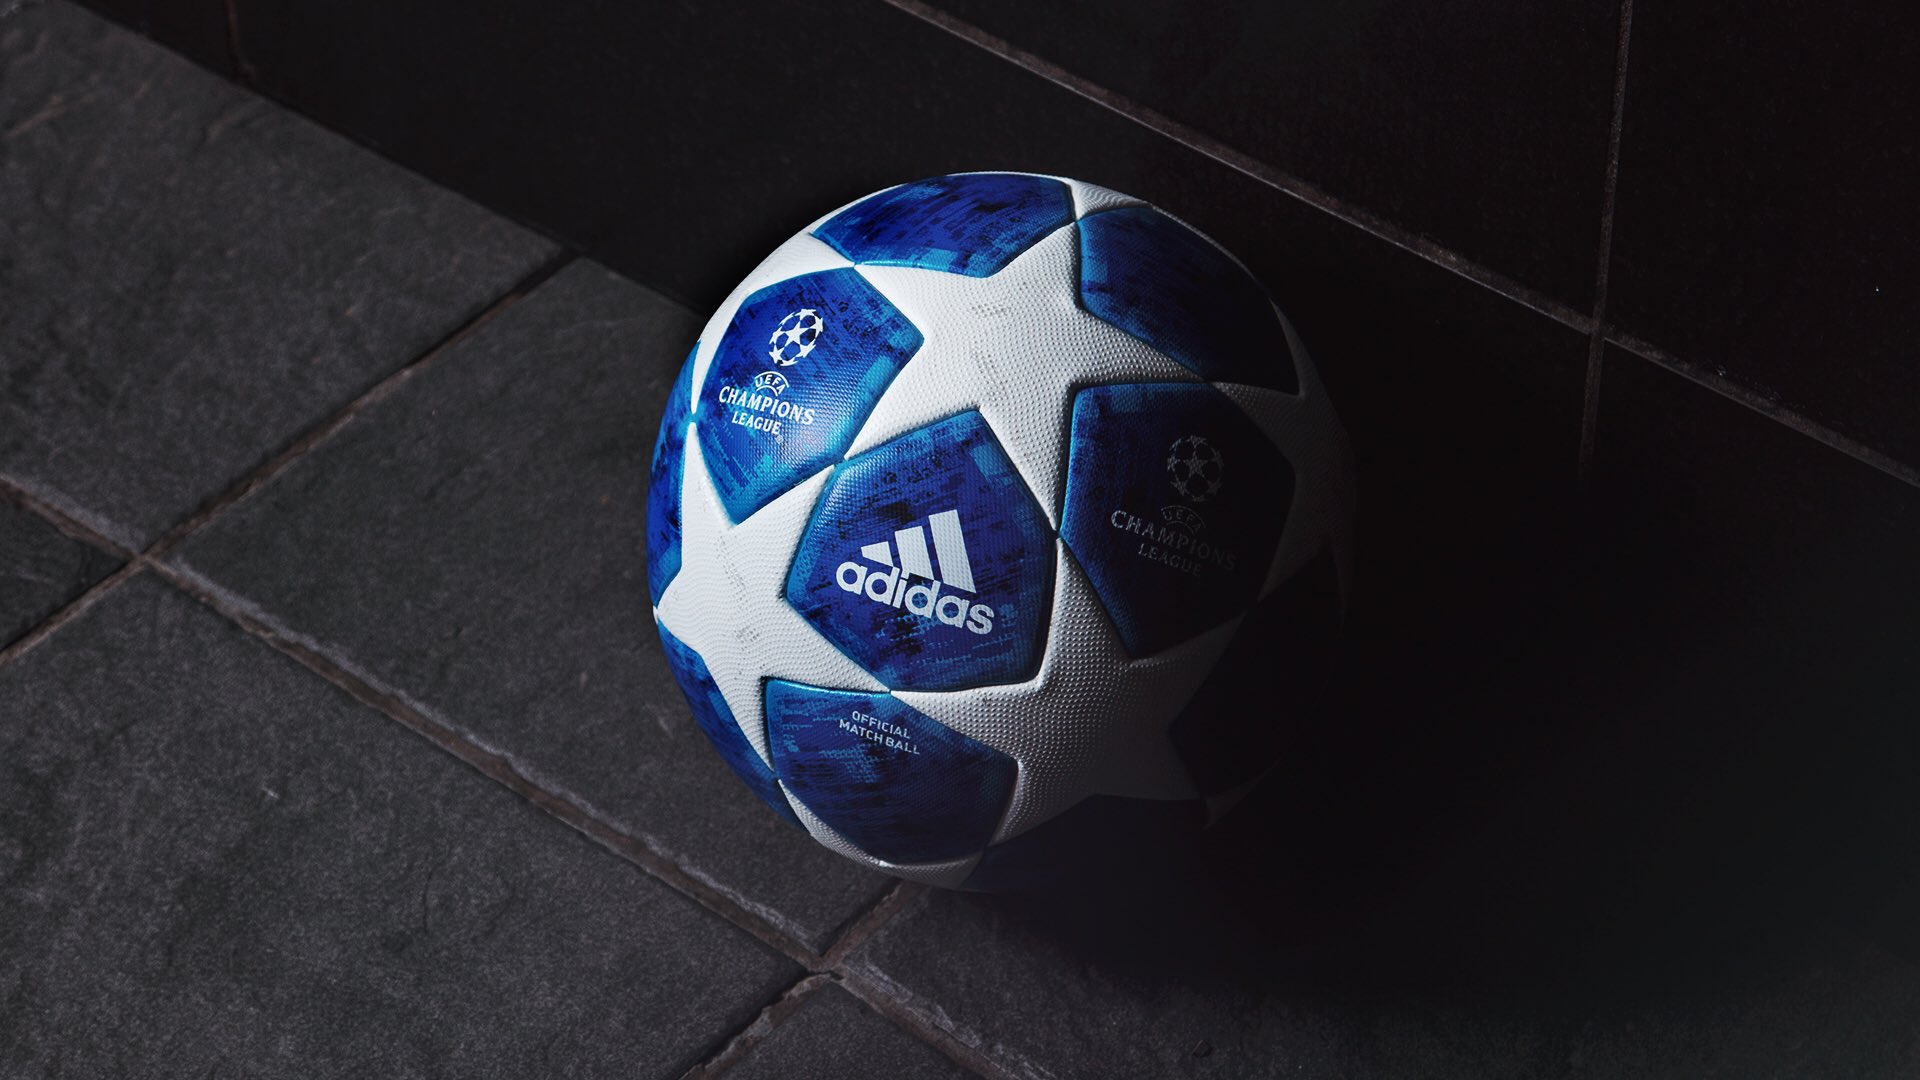 adidas Football on Twitter: "Road to Introducing new @ChampionsLeague official match ball the 2018/19 season. #HereToCreate / Twitter